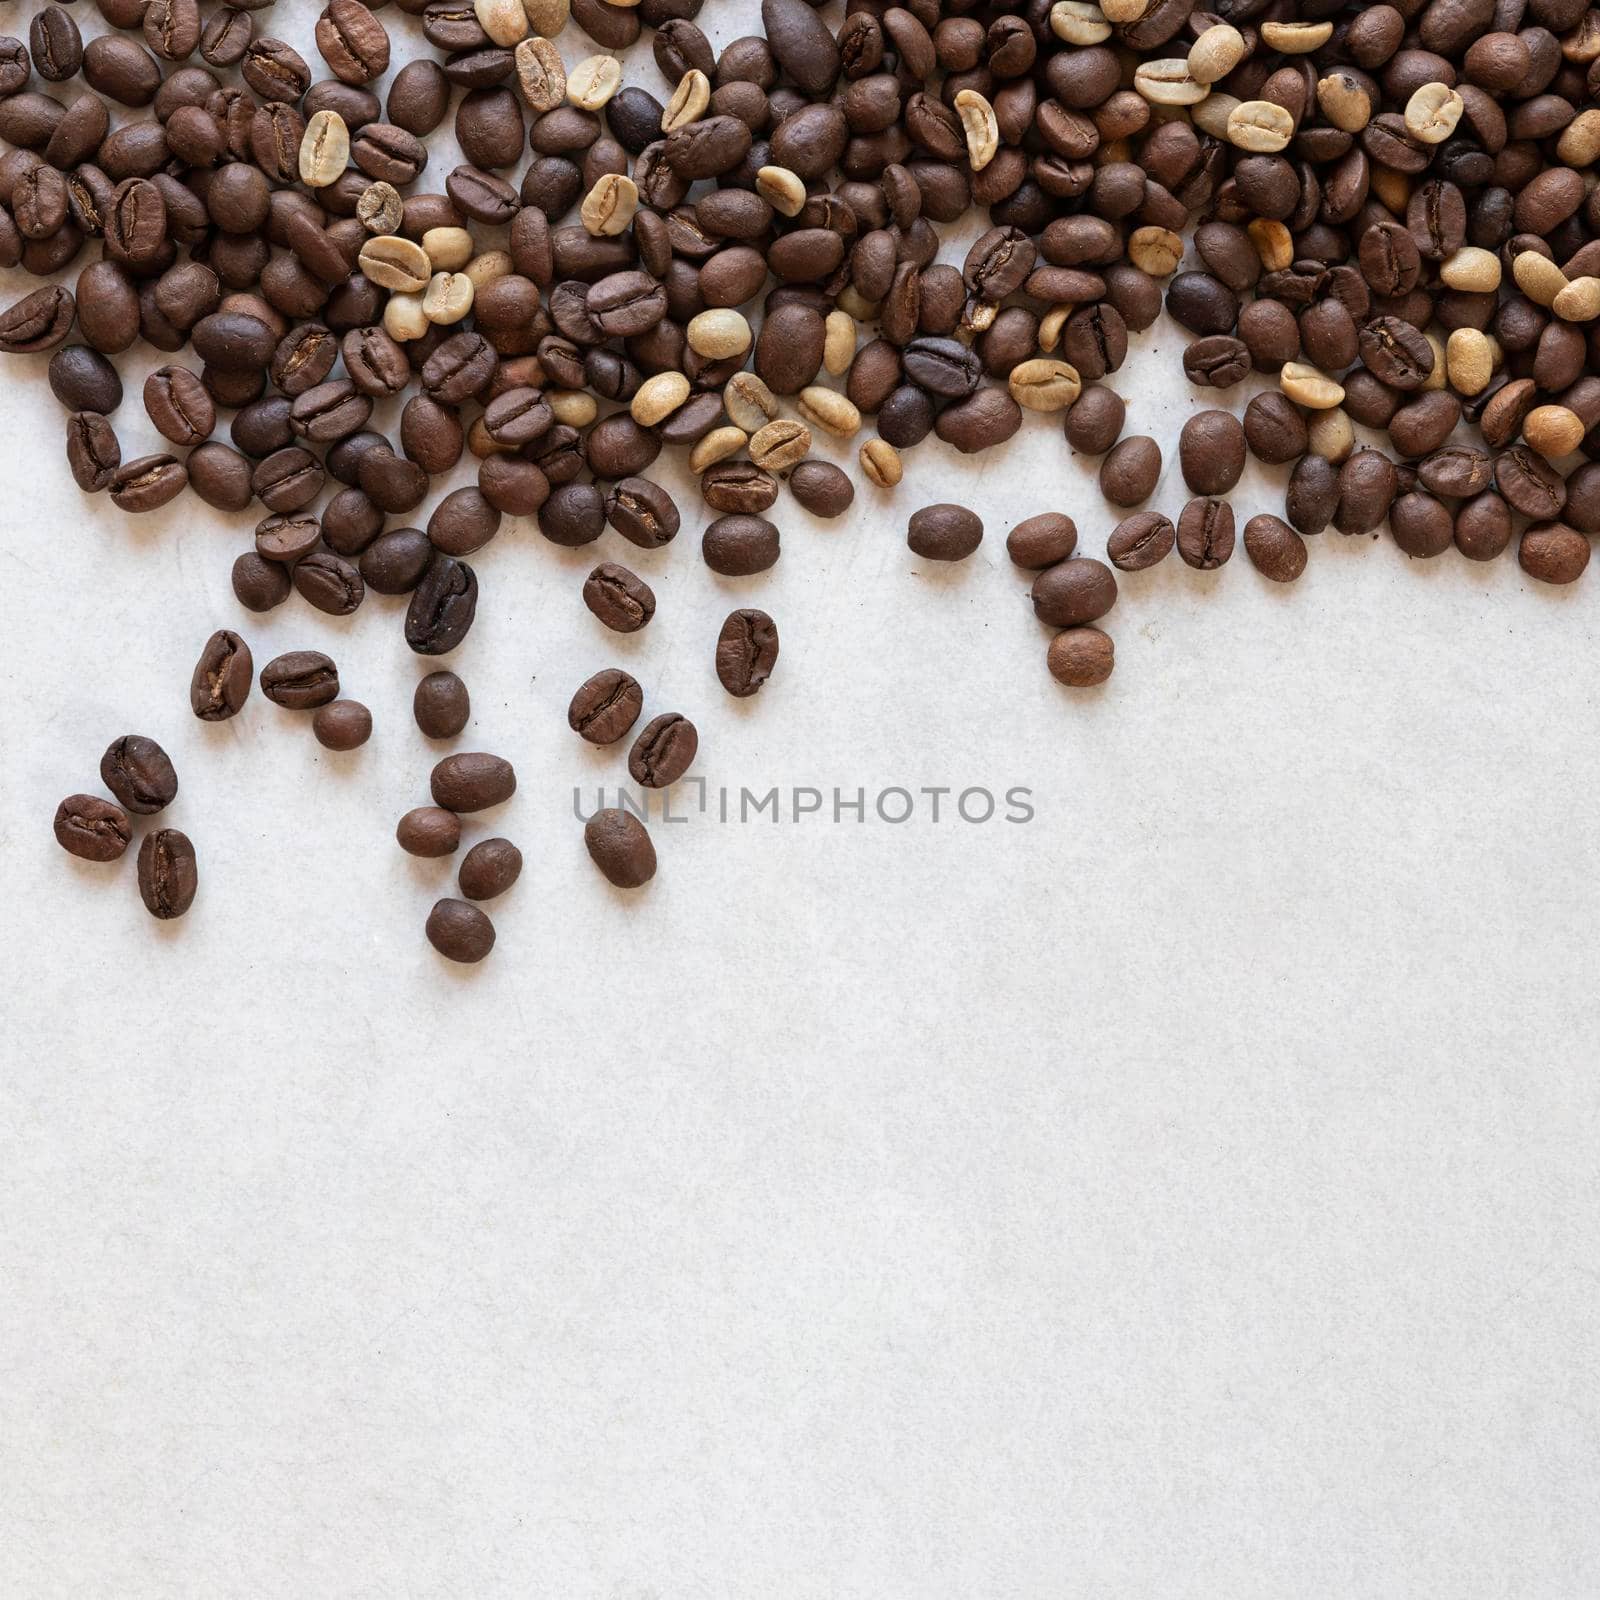 coffee beans table. High quality photo by Zahard